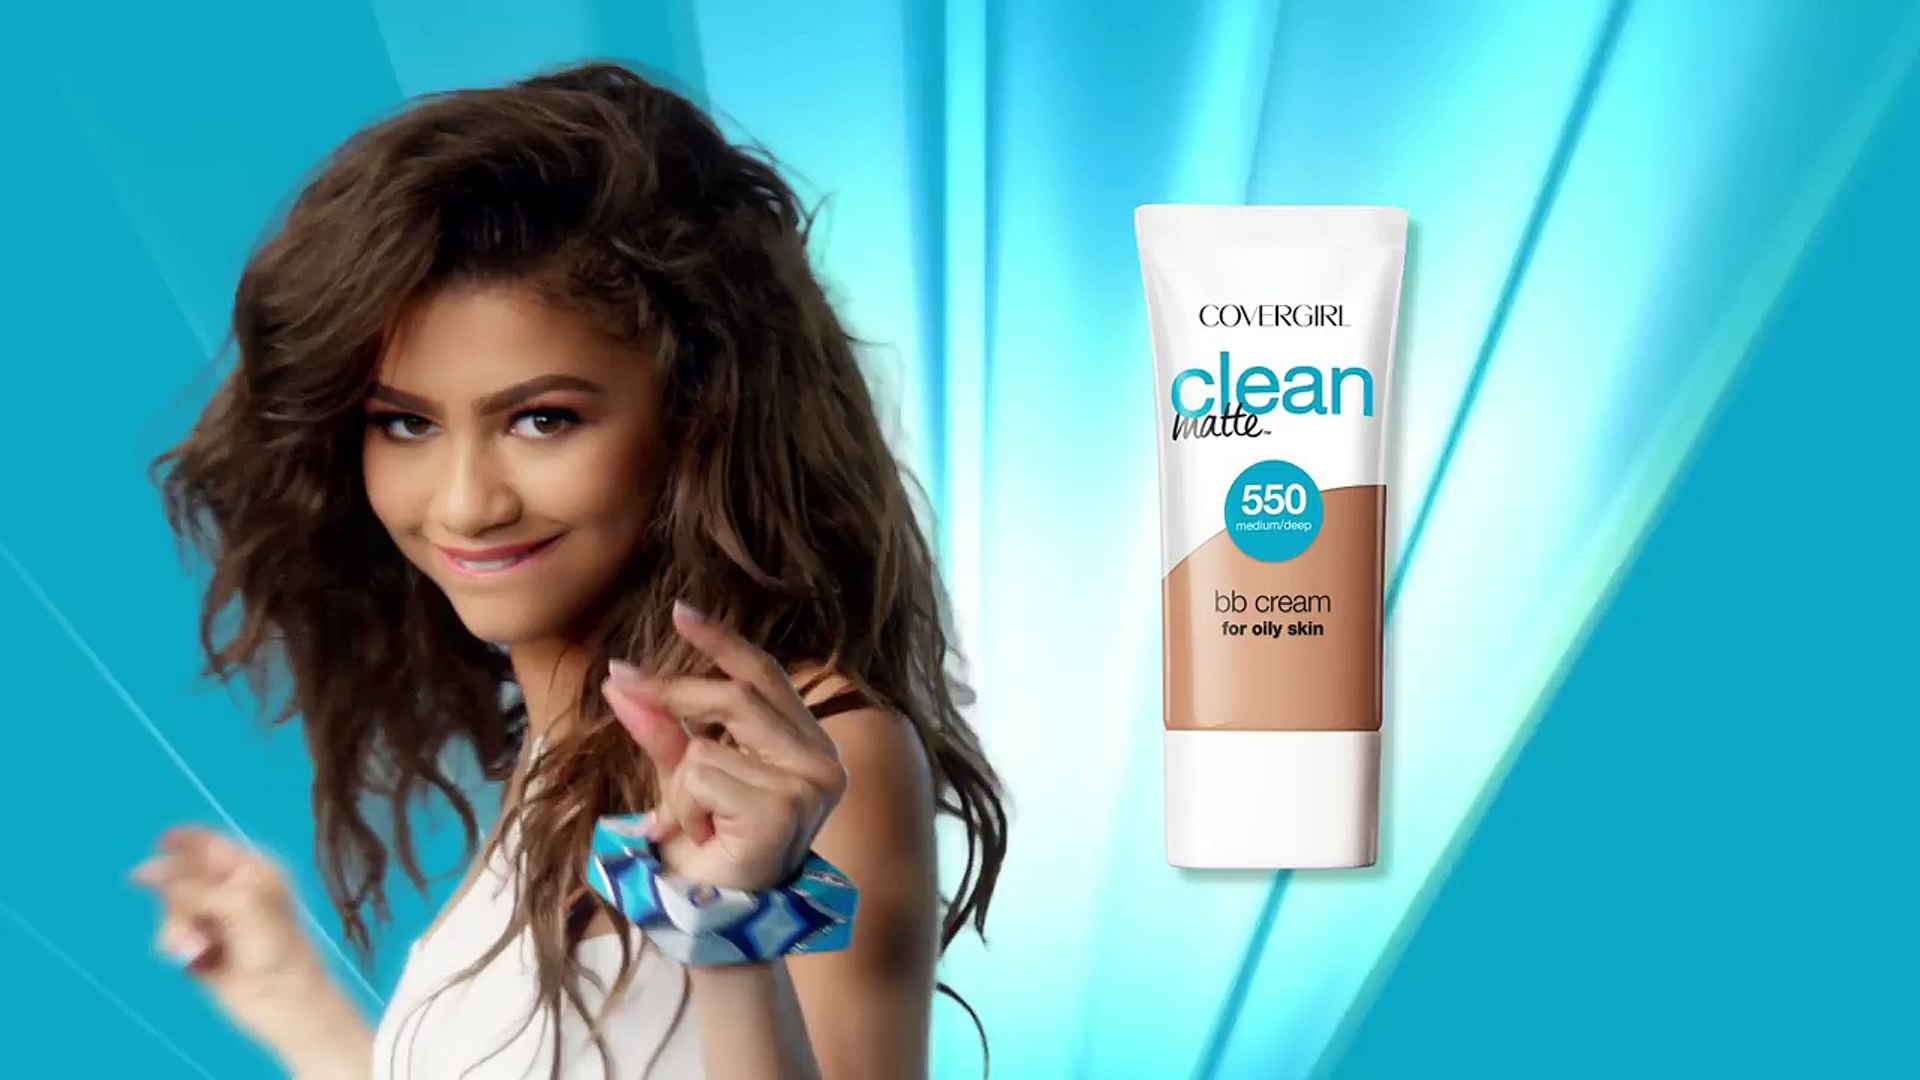 Clean Matte BB Cream for Oily Skin with Zendaya | COVERGIRL ...